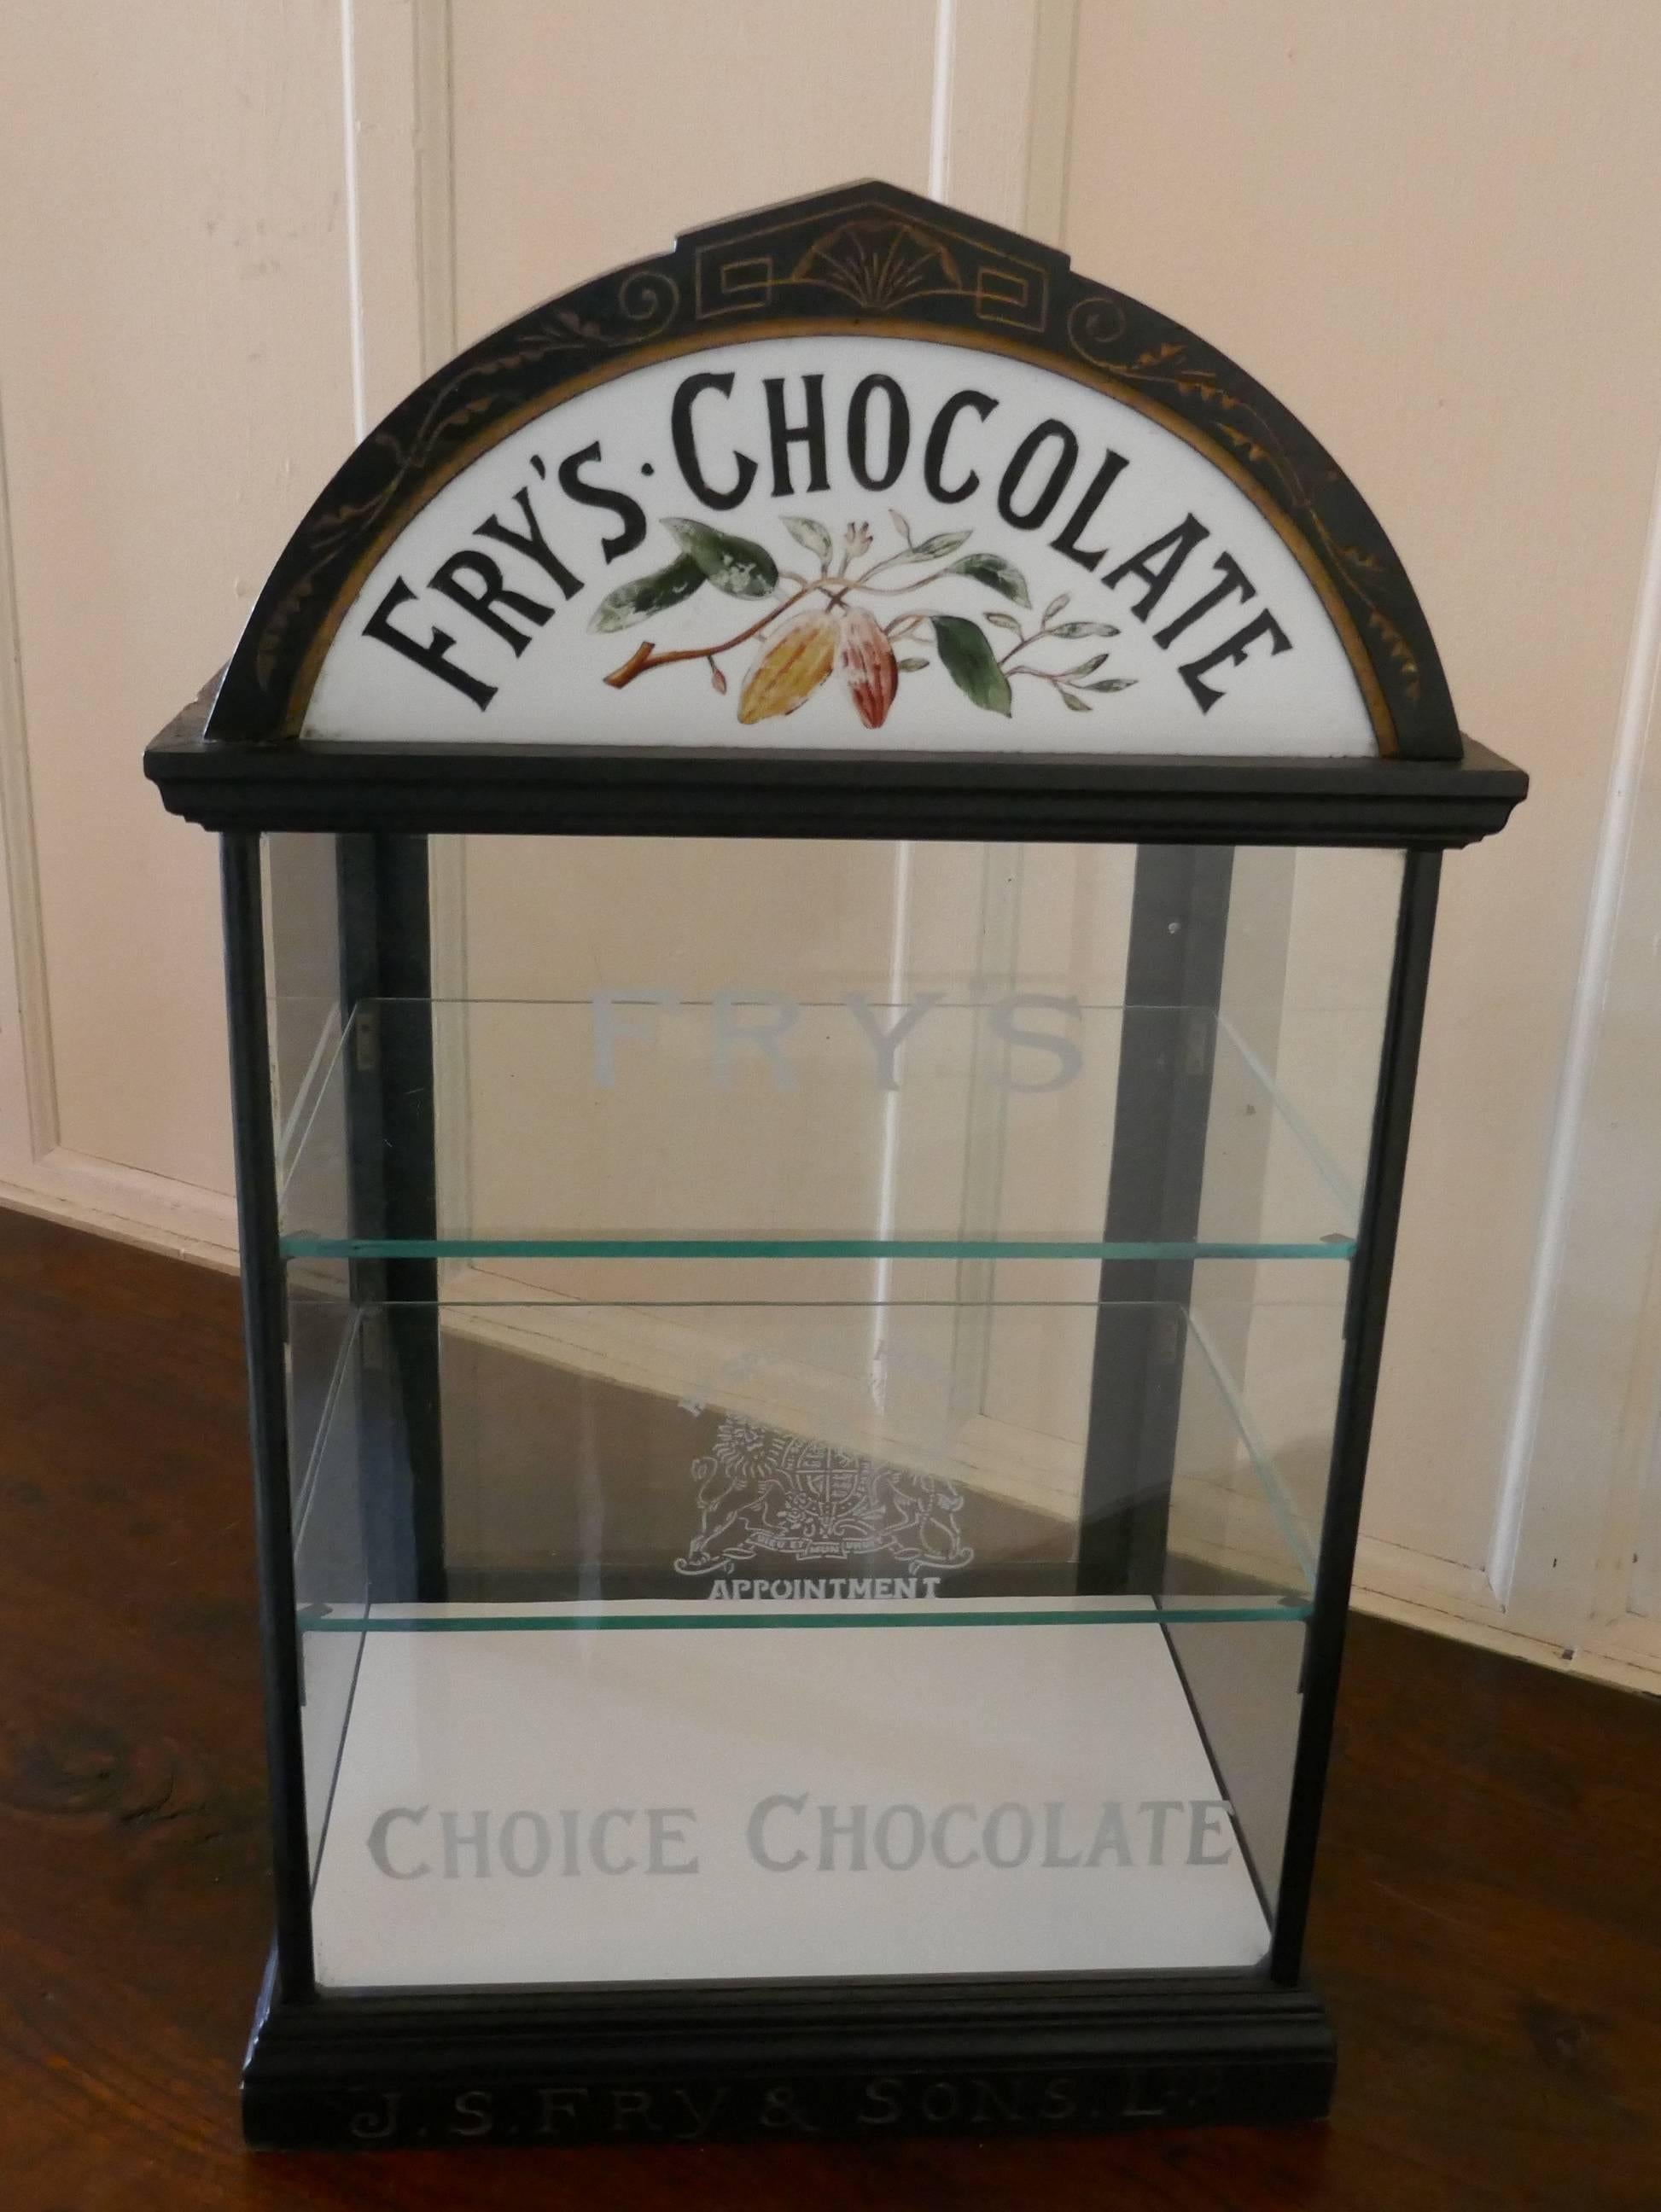 Fry’s chocolate sweet shop display cabinet

This glazed advertising Shop Display Cabinet it has an ebonised finish, the cabinet has a rather grand arching cornice. The cornice is inset with a half moon etched glass painted and decorated with FRY’S